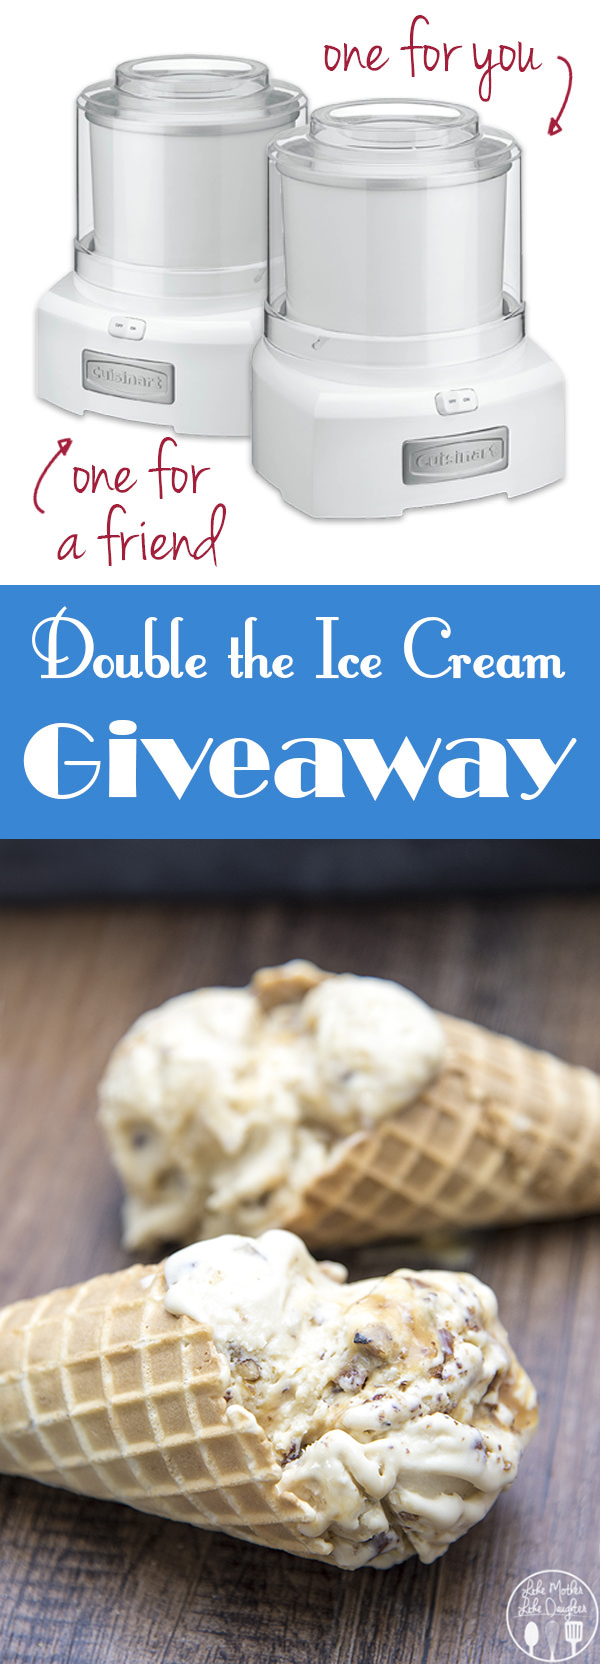 Salted Caramel Pecan Ice Cream and a giveaway! Win an ice cream maker for you and a friend!